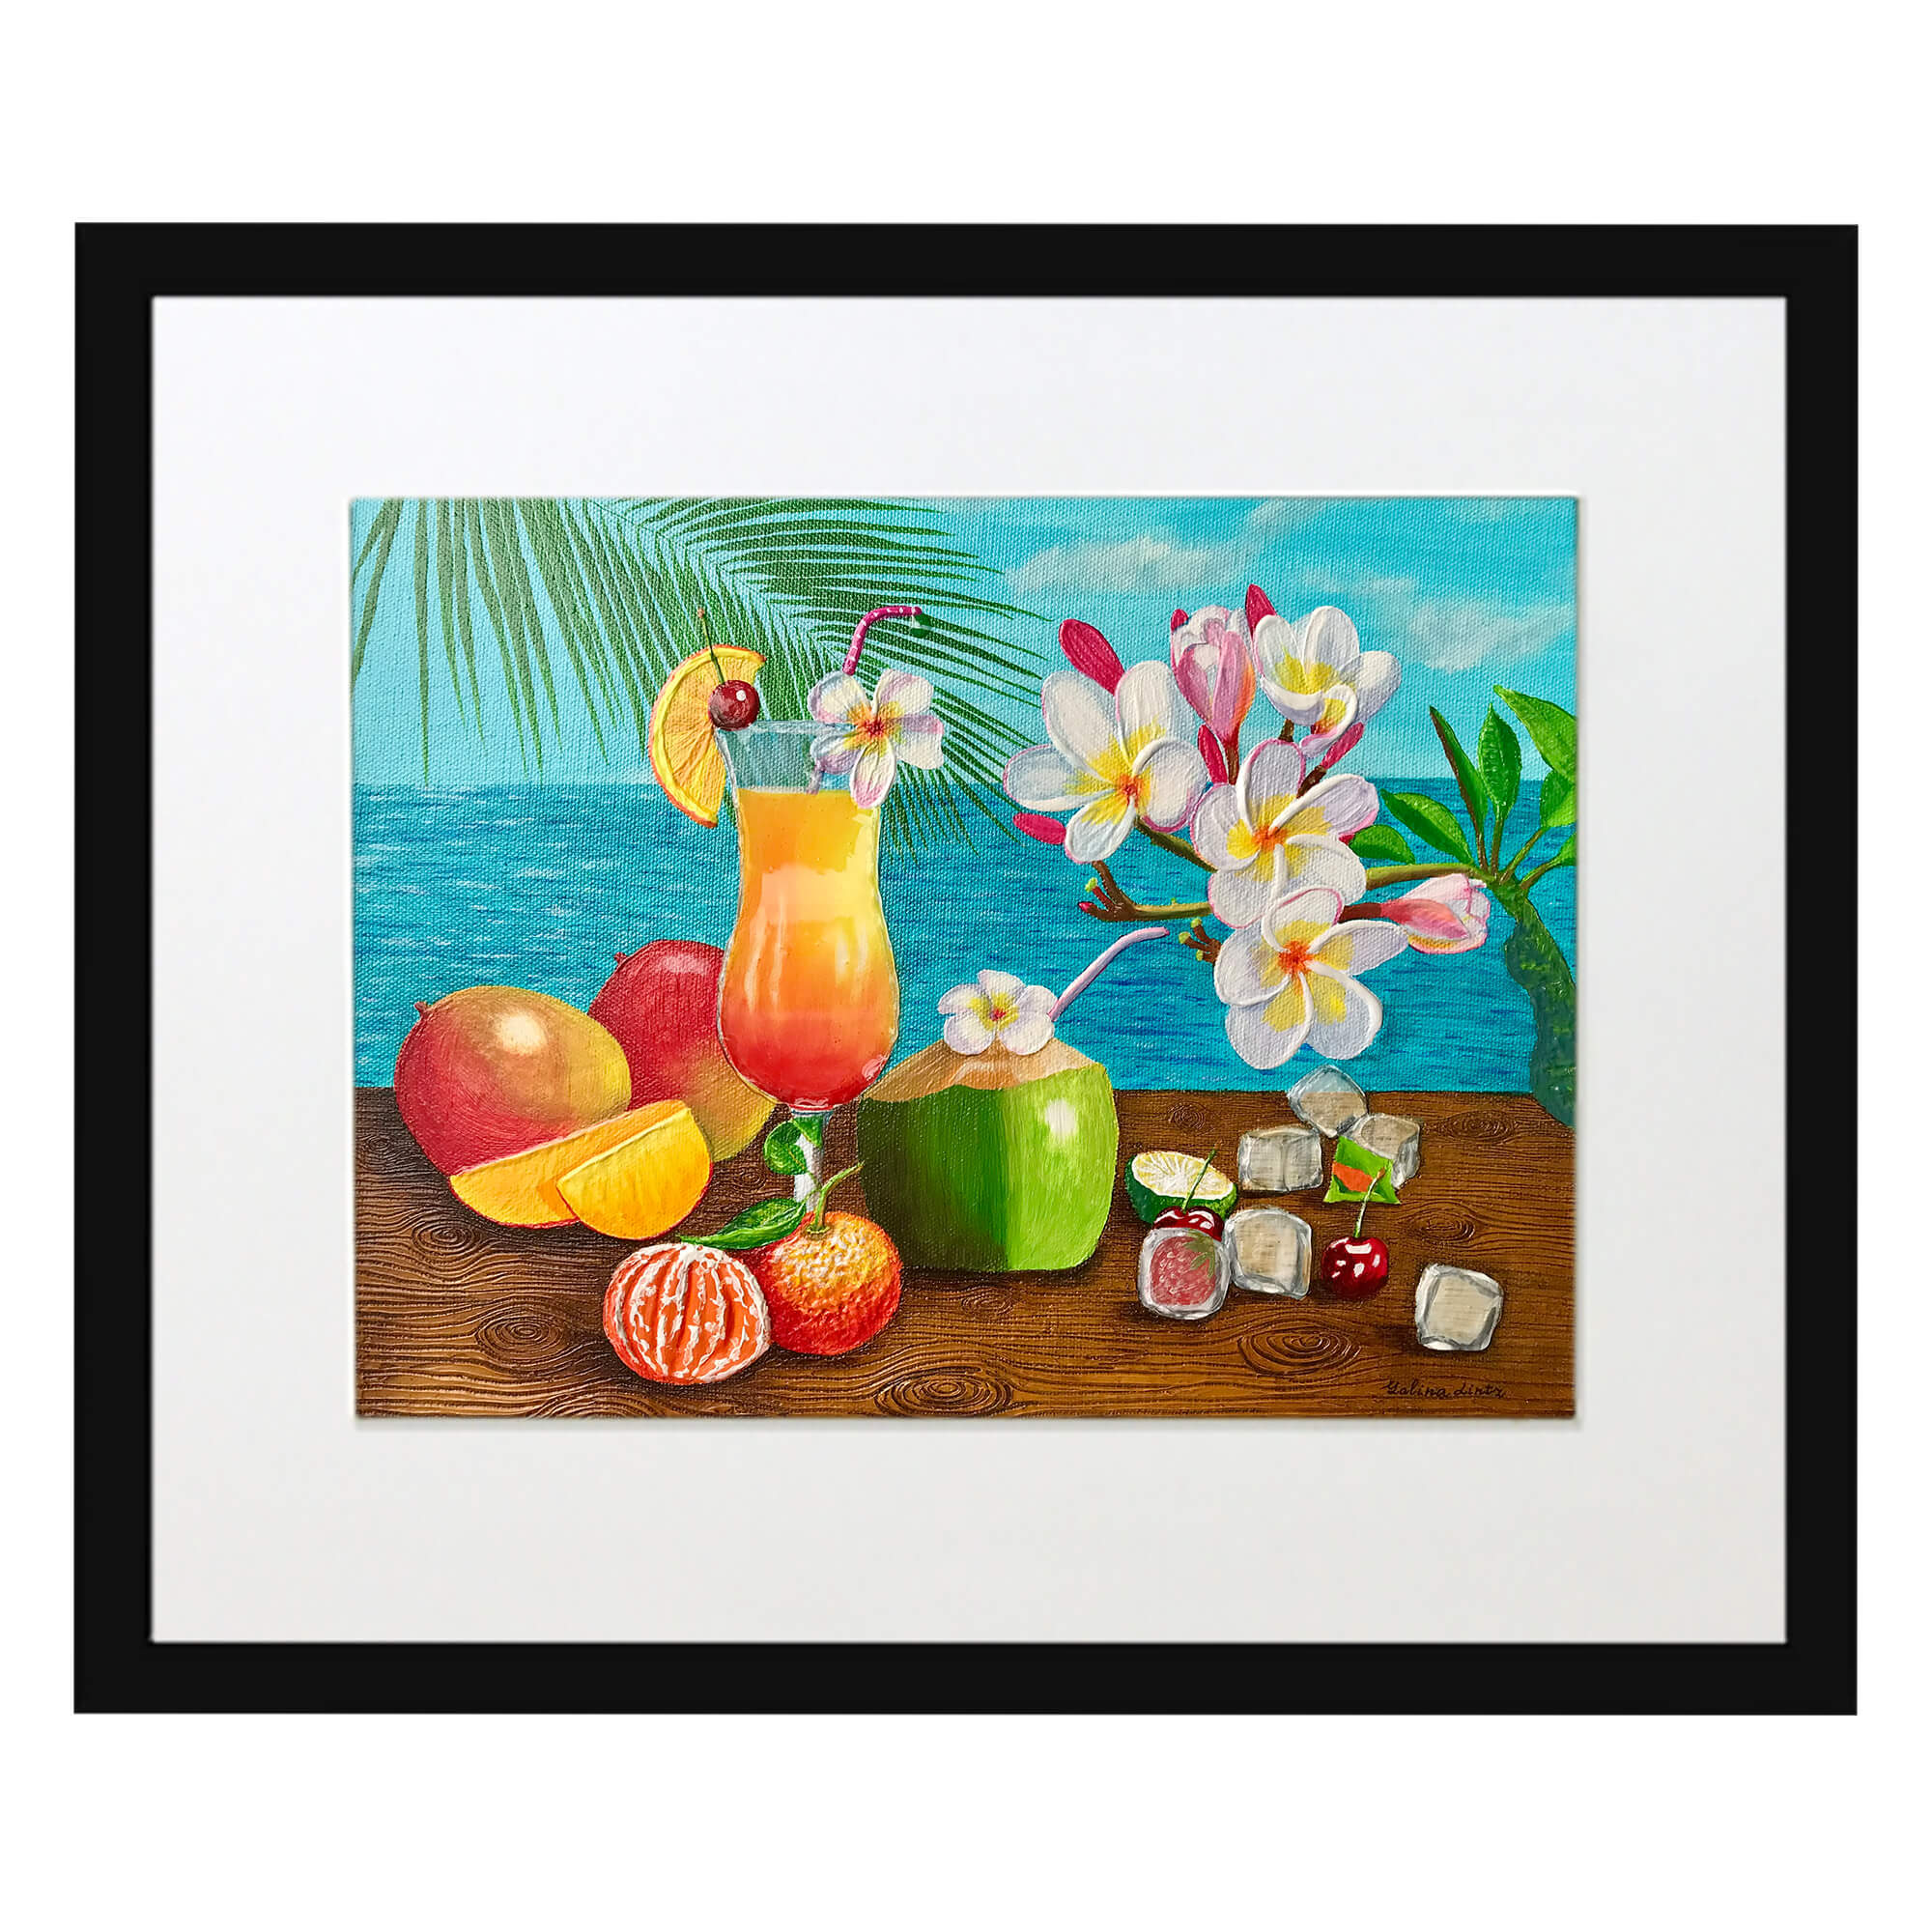 Matted art print with black frame showcasing white flowers by hawaii artist Galina Lintz